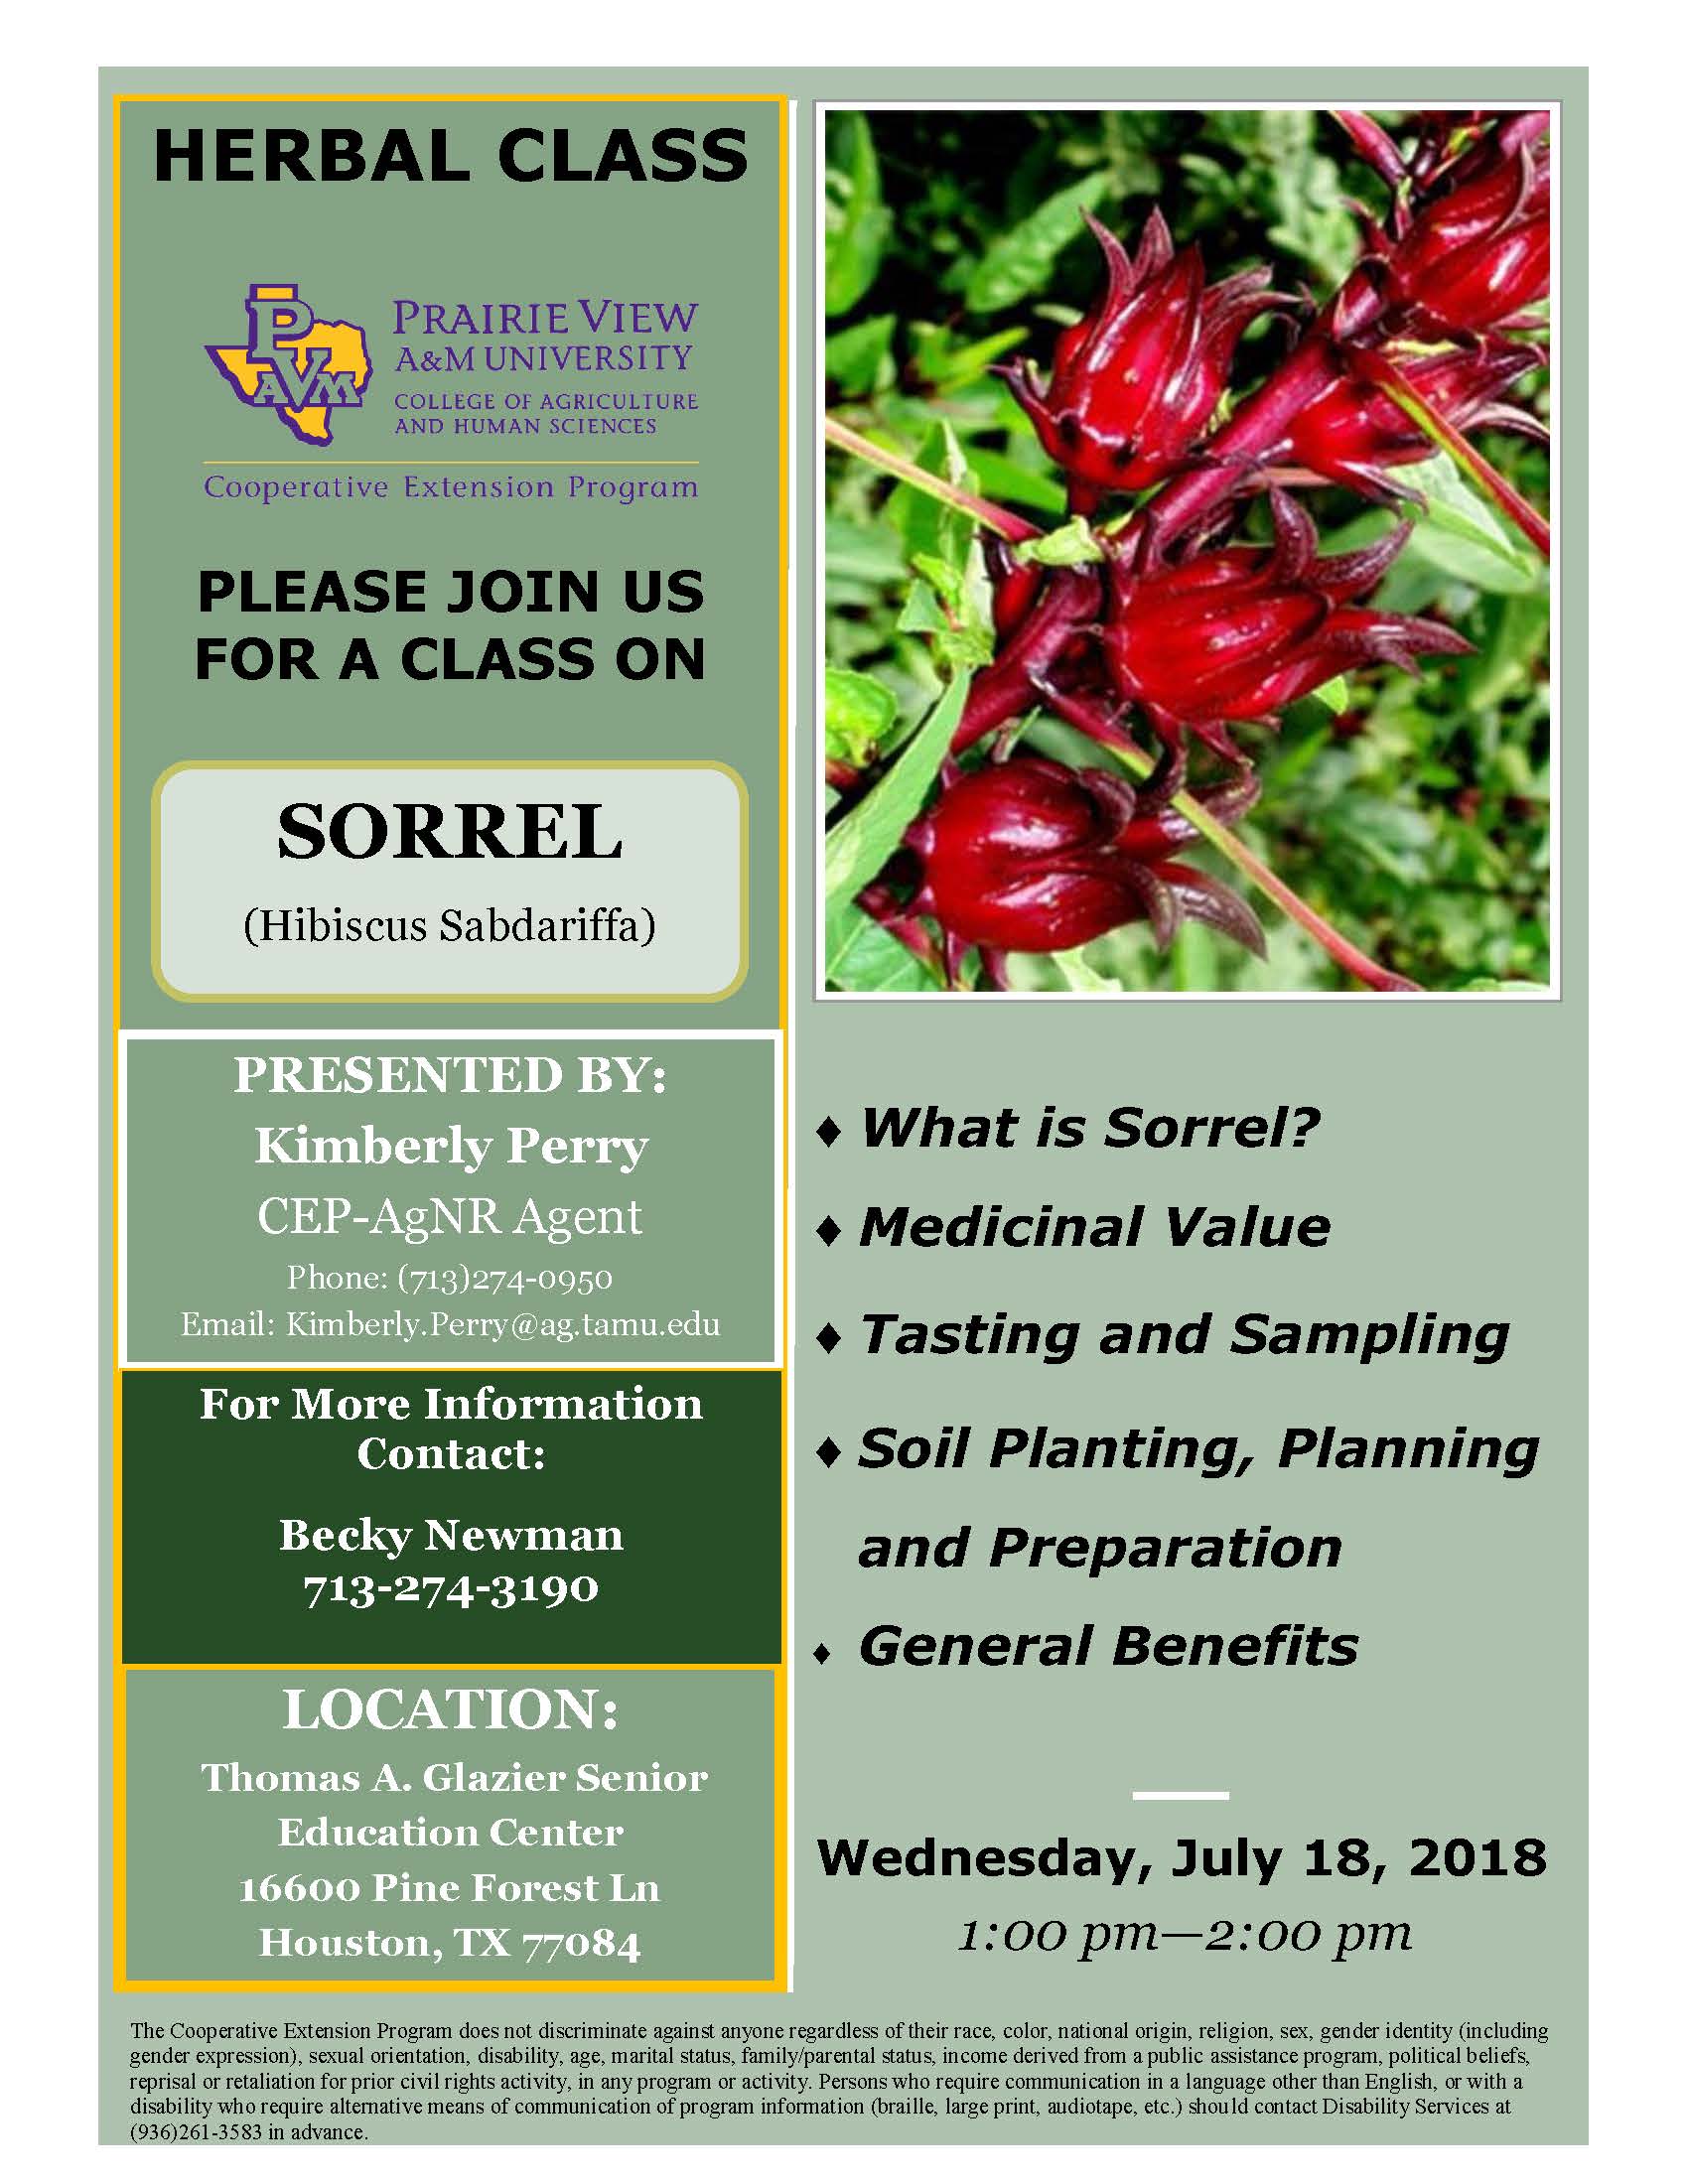 Come join us and learn more about the herb Sorrel (hibiscus Sabdaffriffa) presented by CEP-AgNR Agent Kimberly Perry at the Thomas A. Glazier Senior Education Center located at 16600 Pine Forest Ln.  Houston, TX 77084 on Wednesday July 18 from 1 pm to 2 pm.  Topics will cover what is Sorrel, medicinal values, tasting and sampling, soil planting, planning and preparation and its general benefits.  For more information, contact Becky Newman at 713-274-3190.